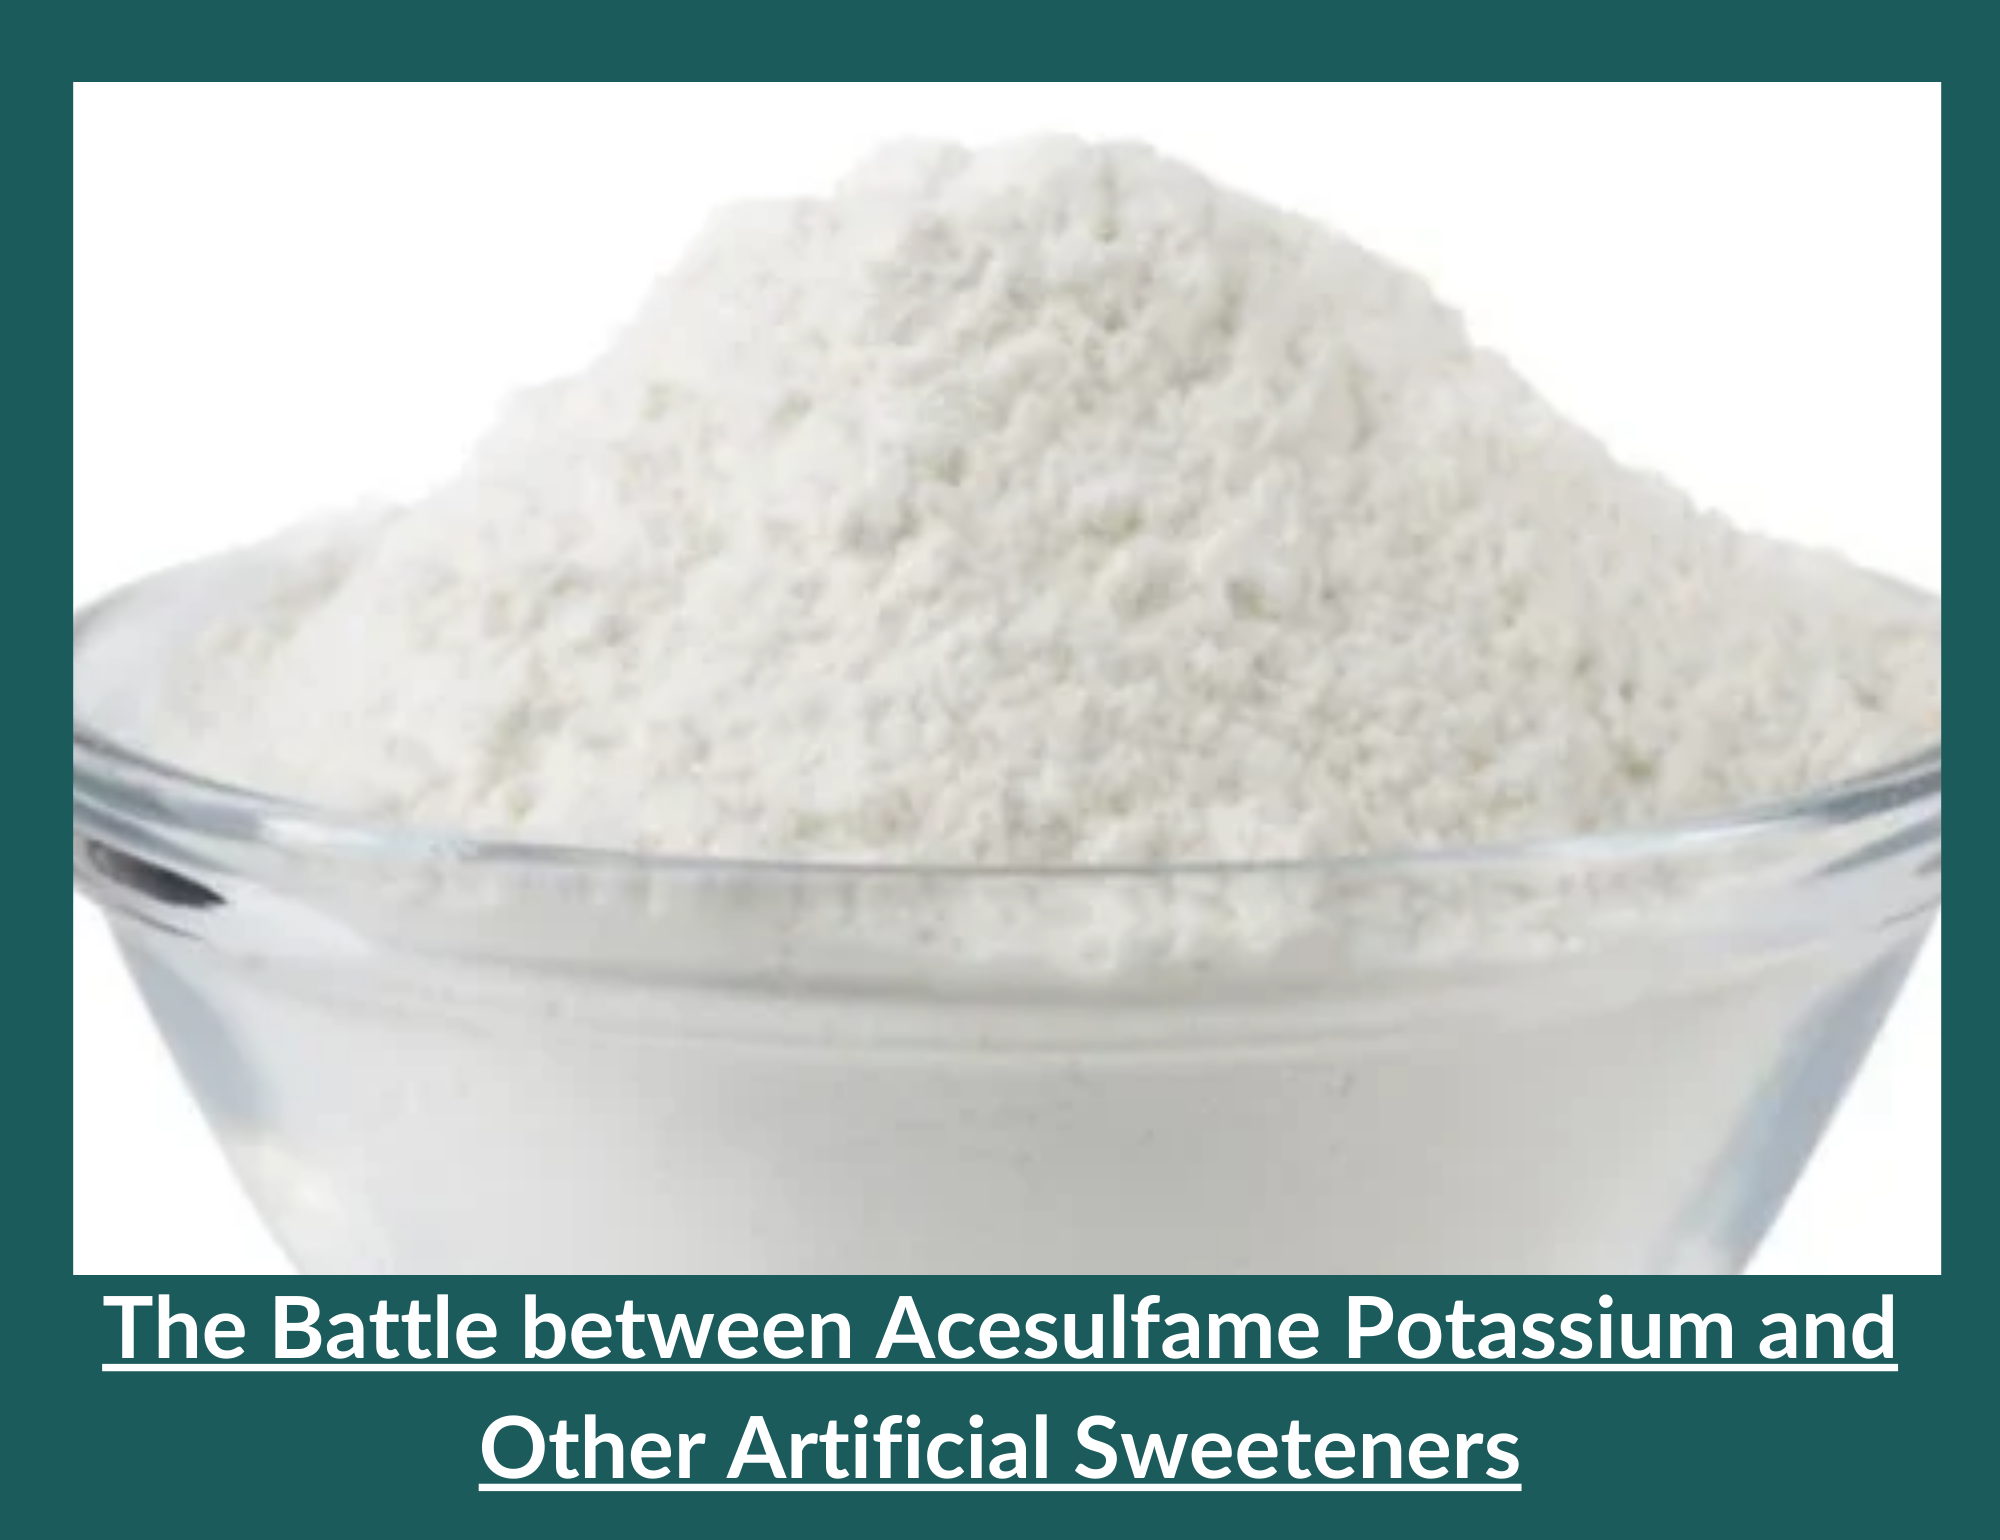 Acesulfame Potassium vs Other Artificial Sweeteners